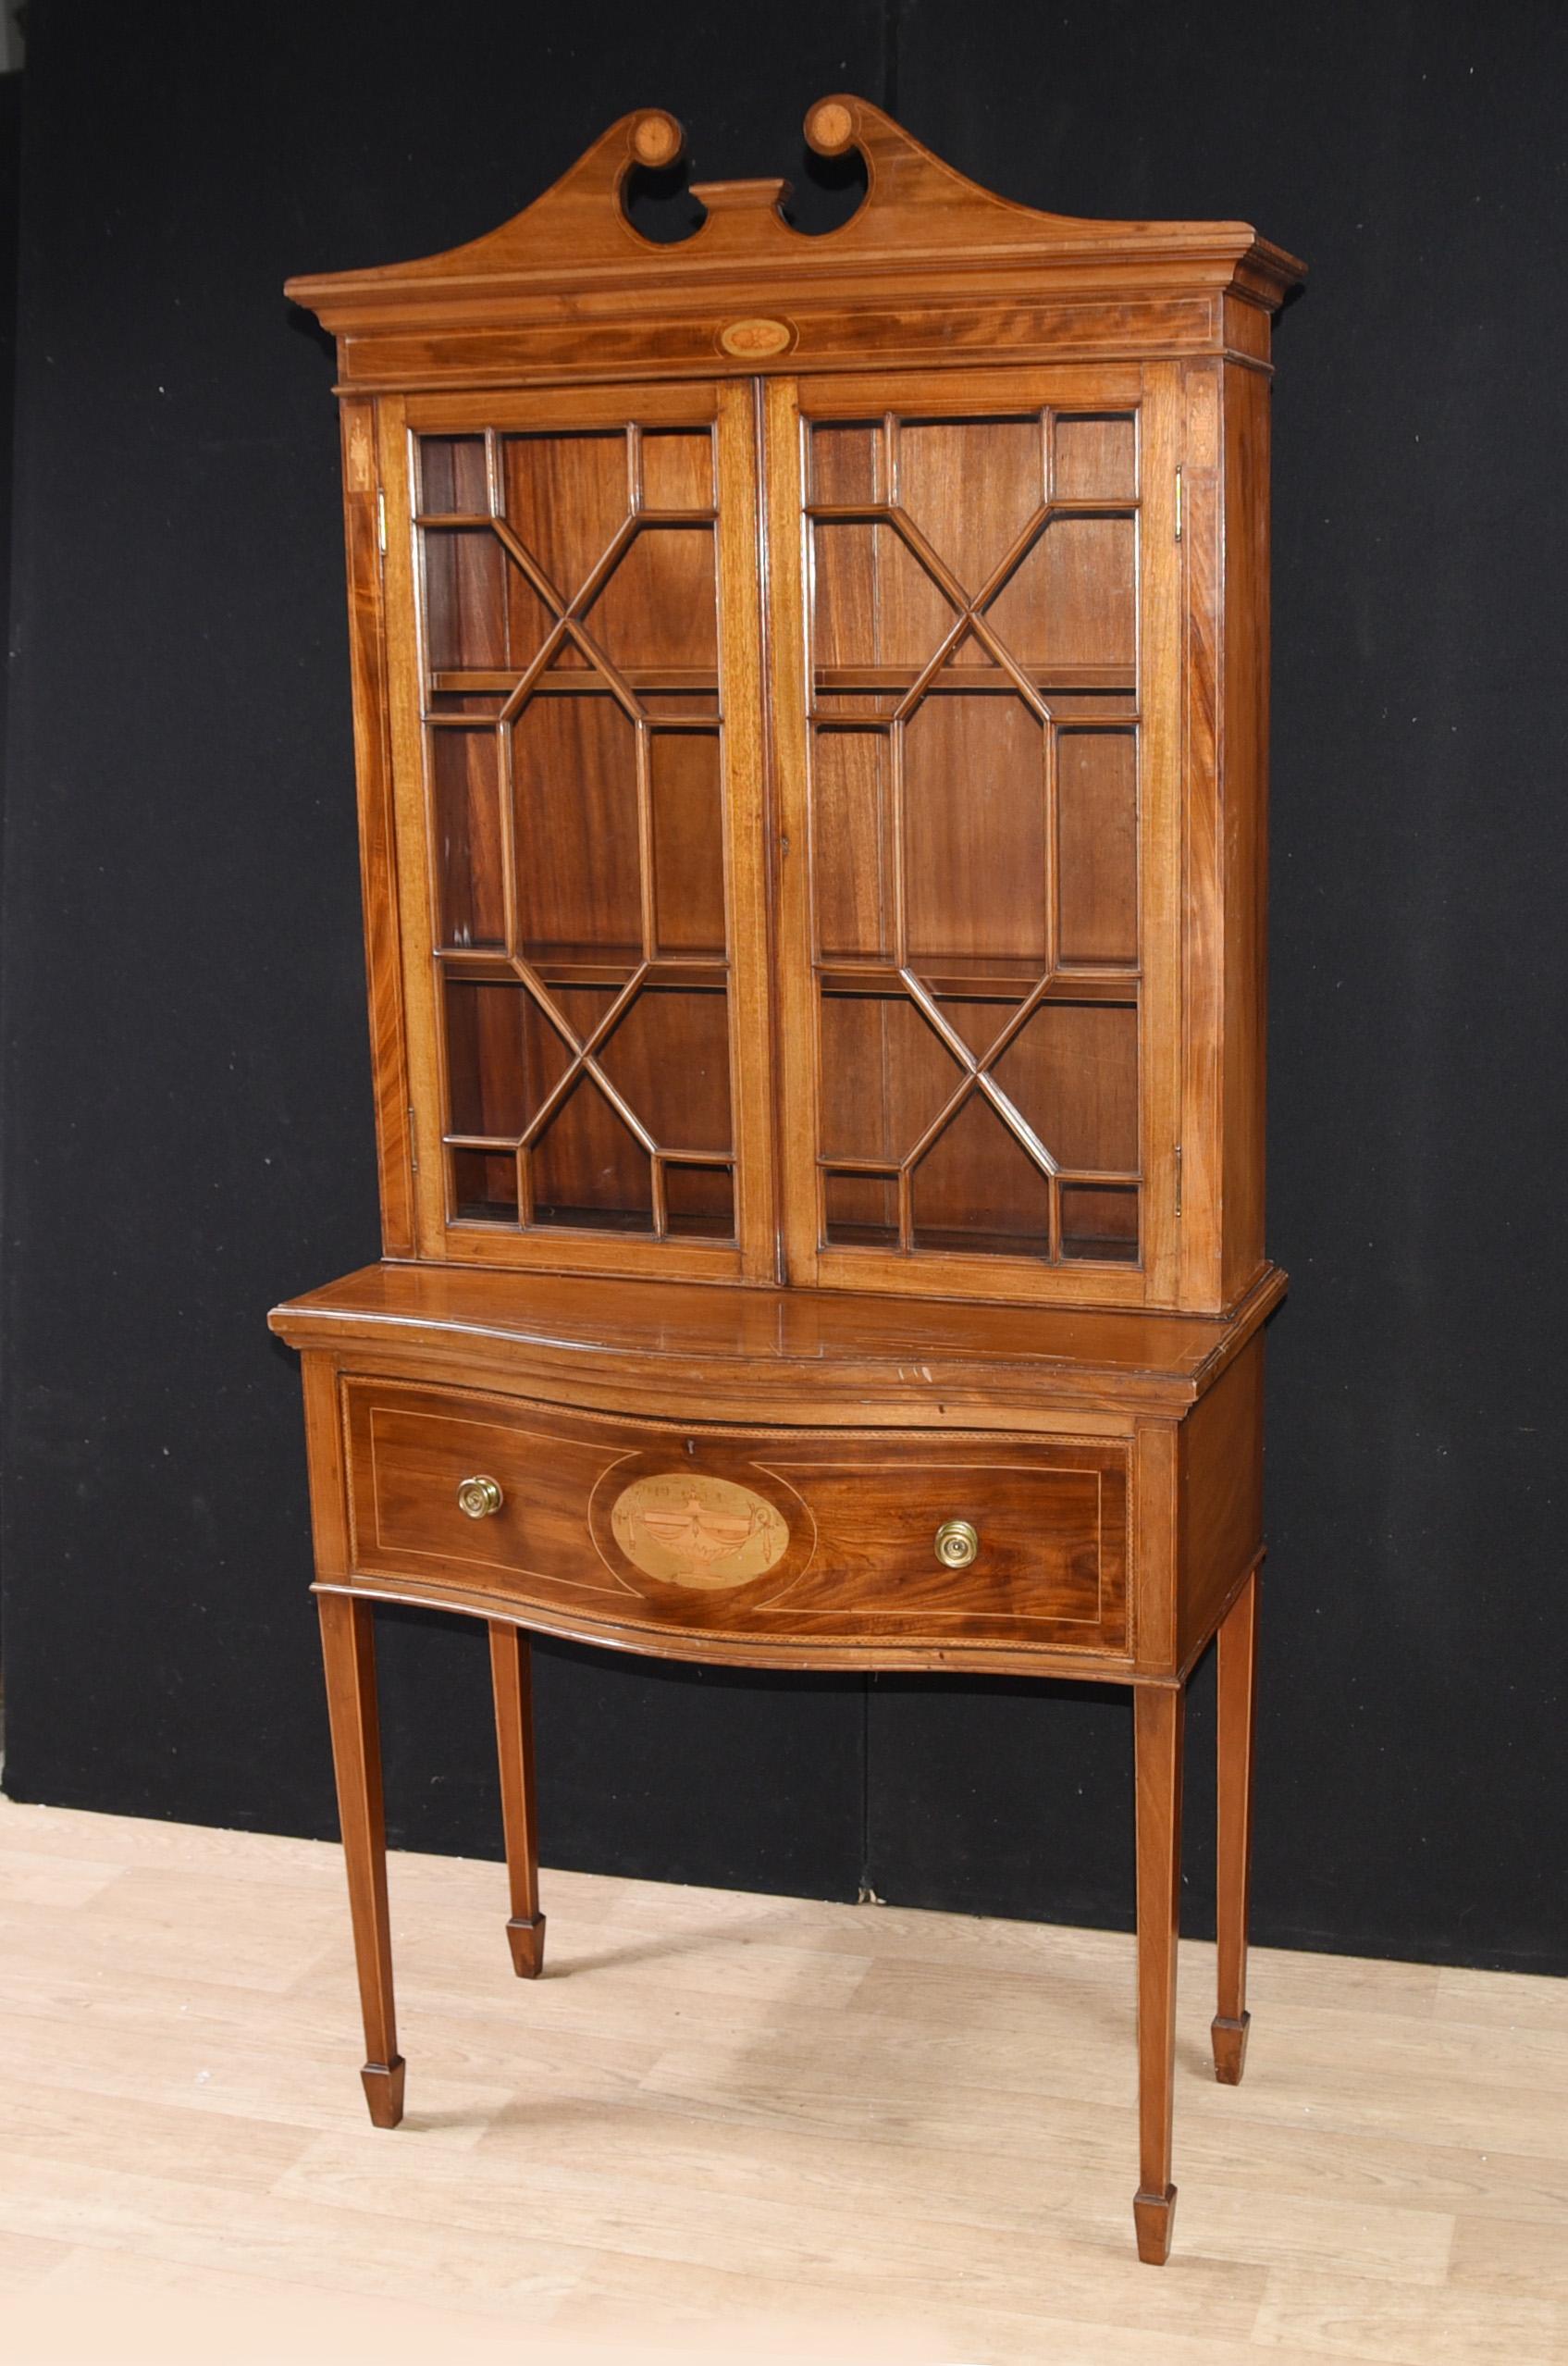 - Gorgeous Regency Sheraton style display cabinet or bookcase
- Clean design to this piece
- Glass fronted top perfect for displaying books and other decorative pieces
- Viewings available by appointment possible at our Hertfordshire showroom
-